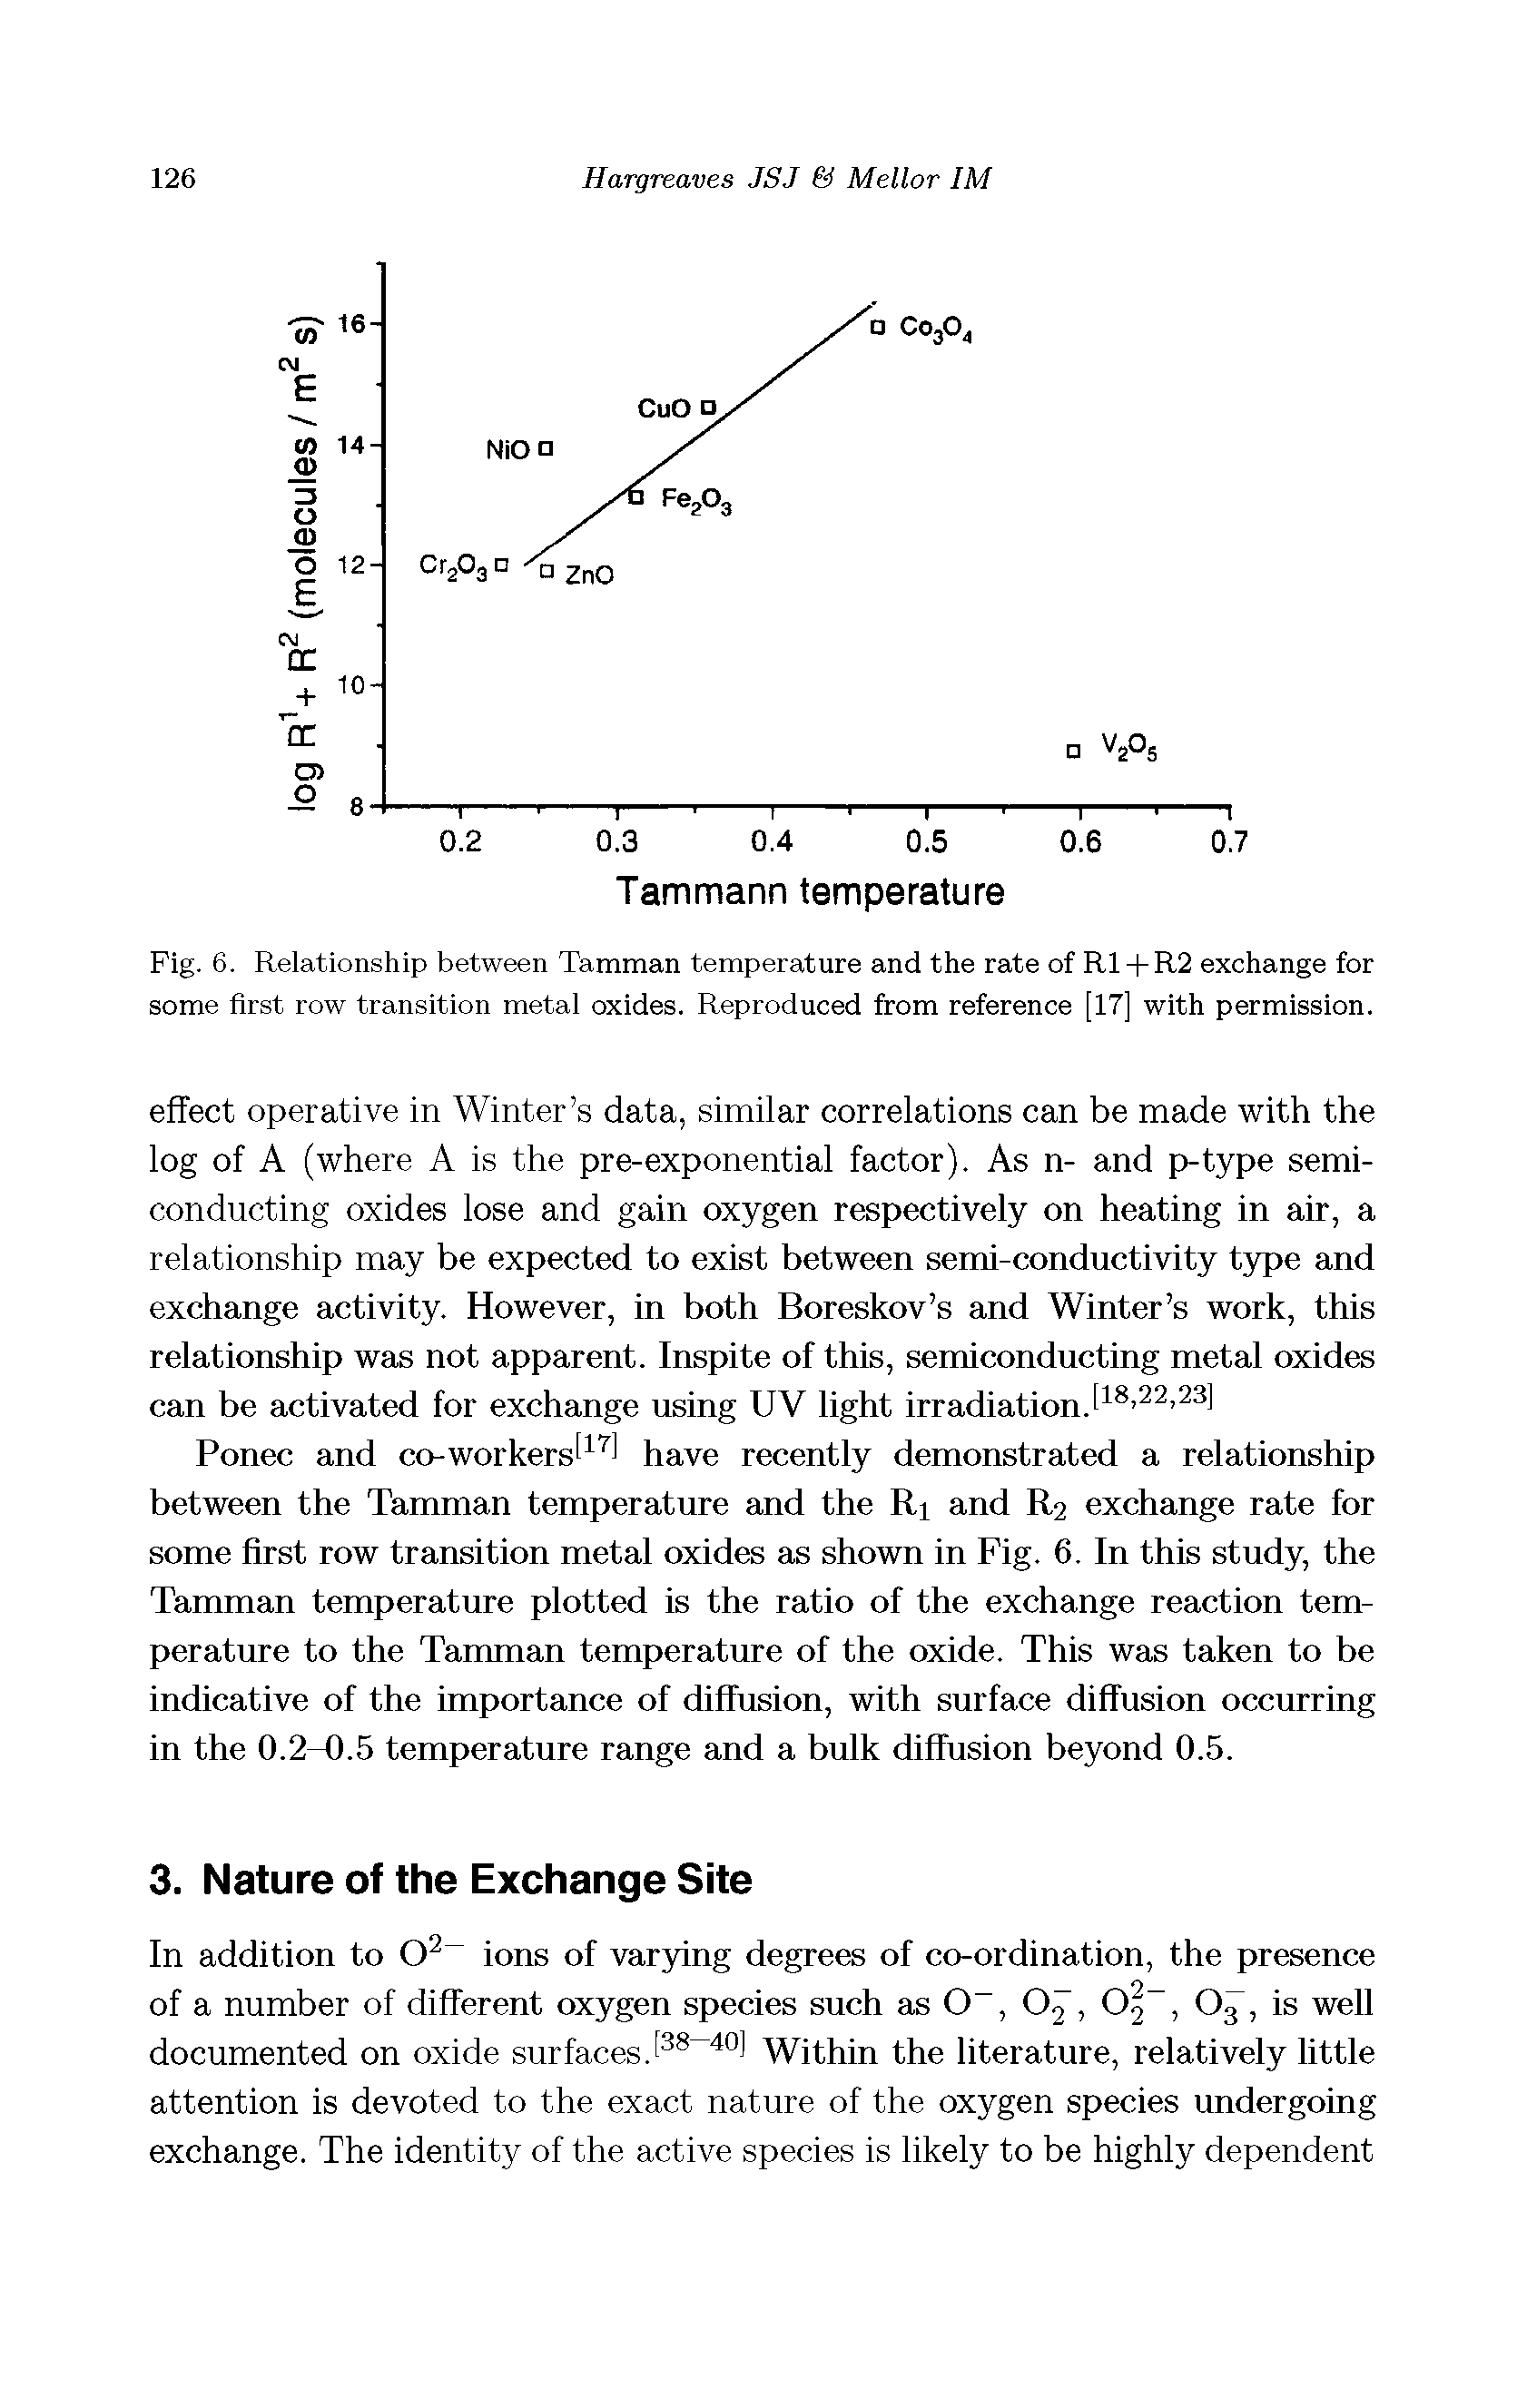 Fig. 6. Relationship between Tamman temperature and the rate of R1 + R2 exchange for some first row transition metal oxides. Reproduced from reference [17] with permission.